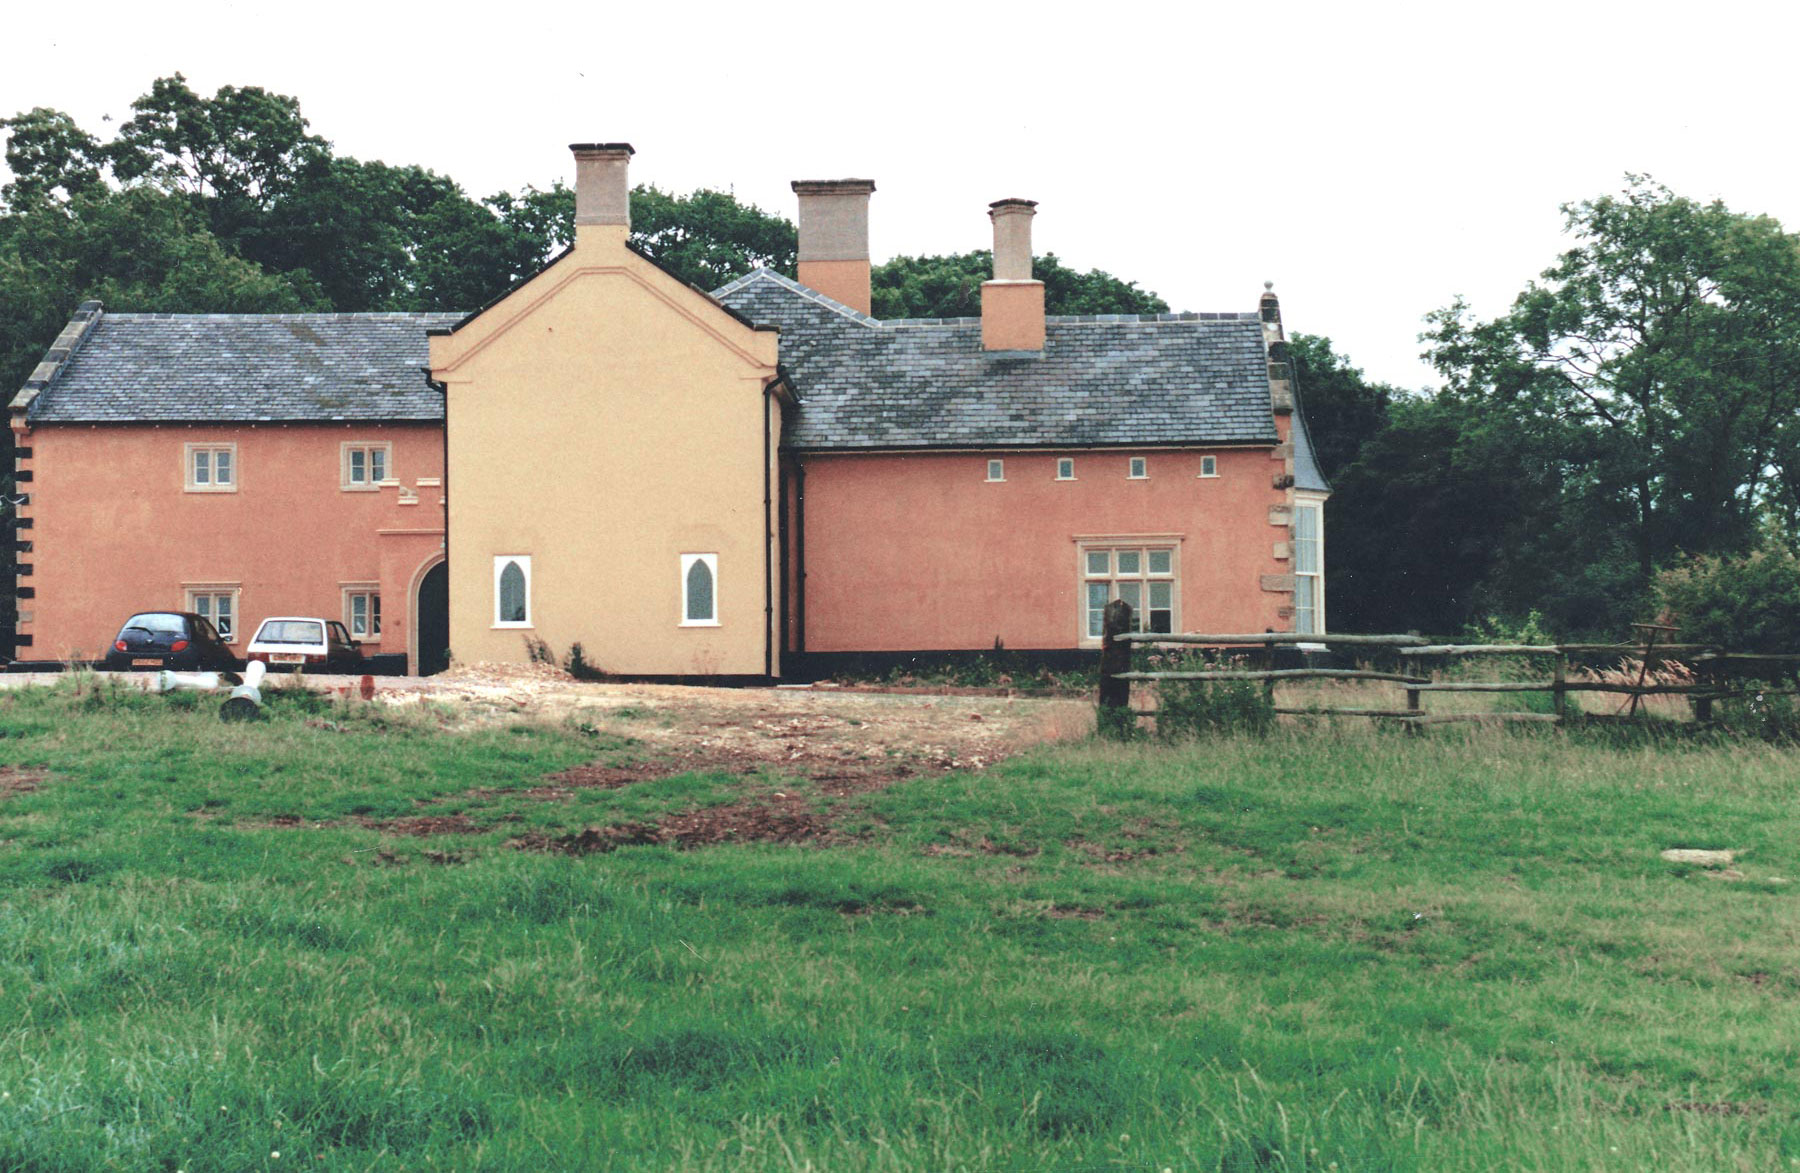 A newly restored country lodge prior to landscaping the grounds